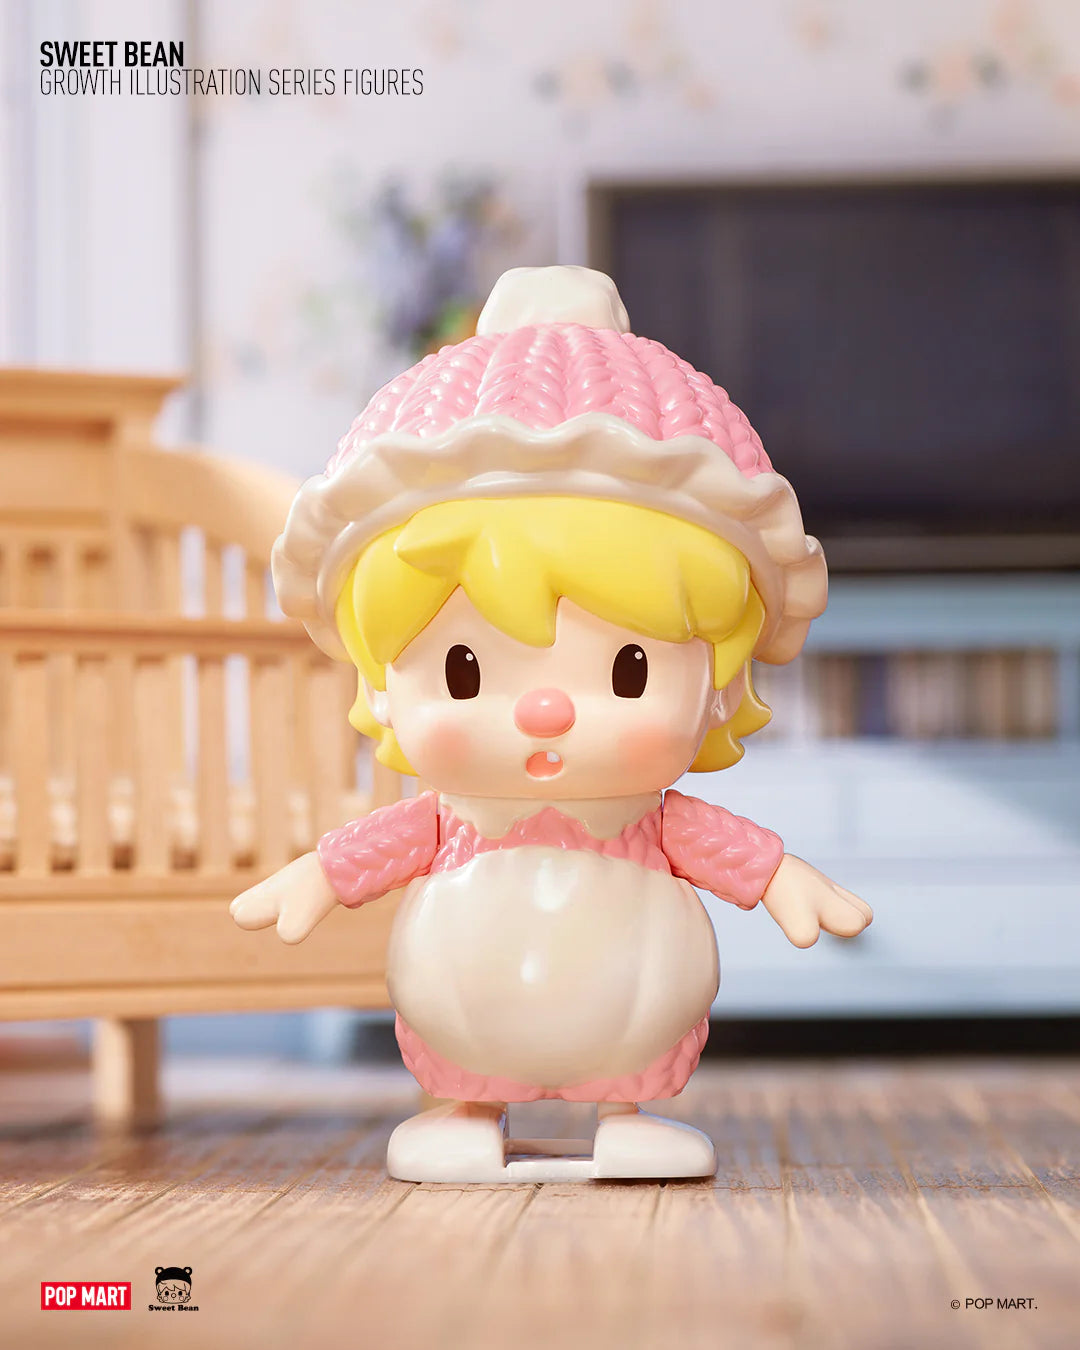 Toy figurine of a baby from SWEET BEAN GROWTH ILLUSTRATION Blind Box Series, with 6 regular and 1 secret options.